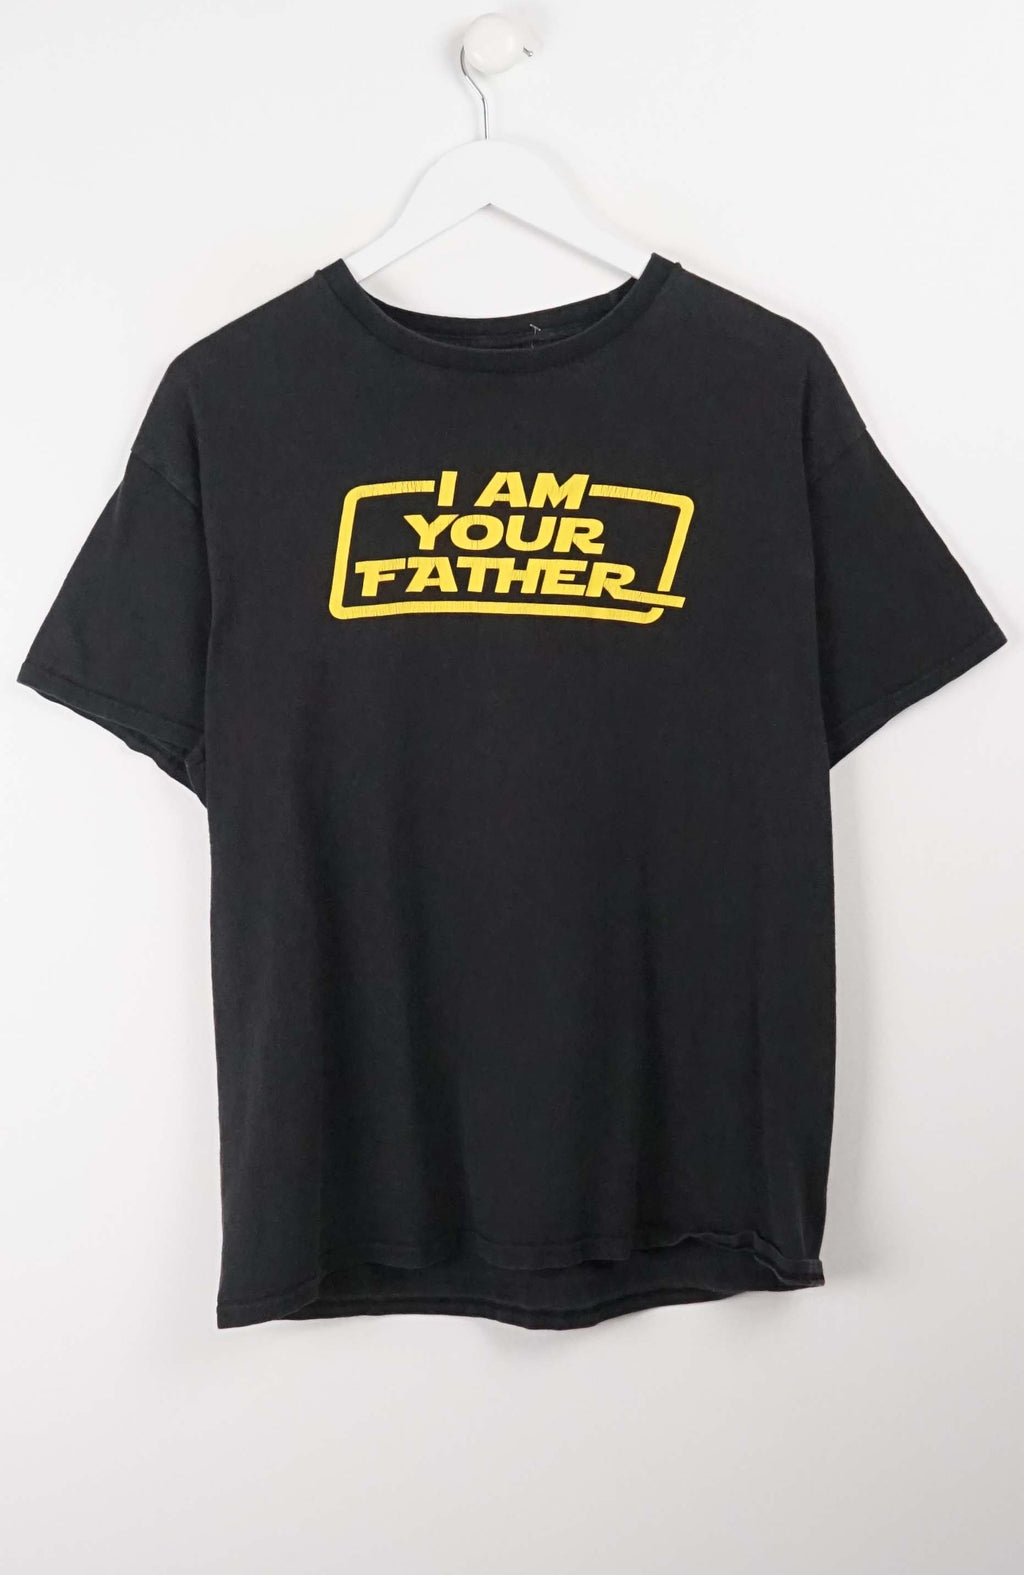 VINTAGE I AM YOUR FATHER T-SHIRT (M)